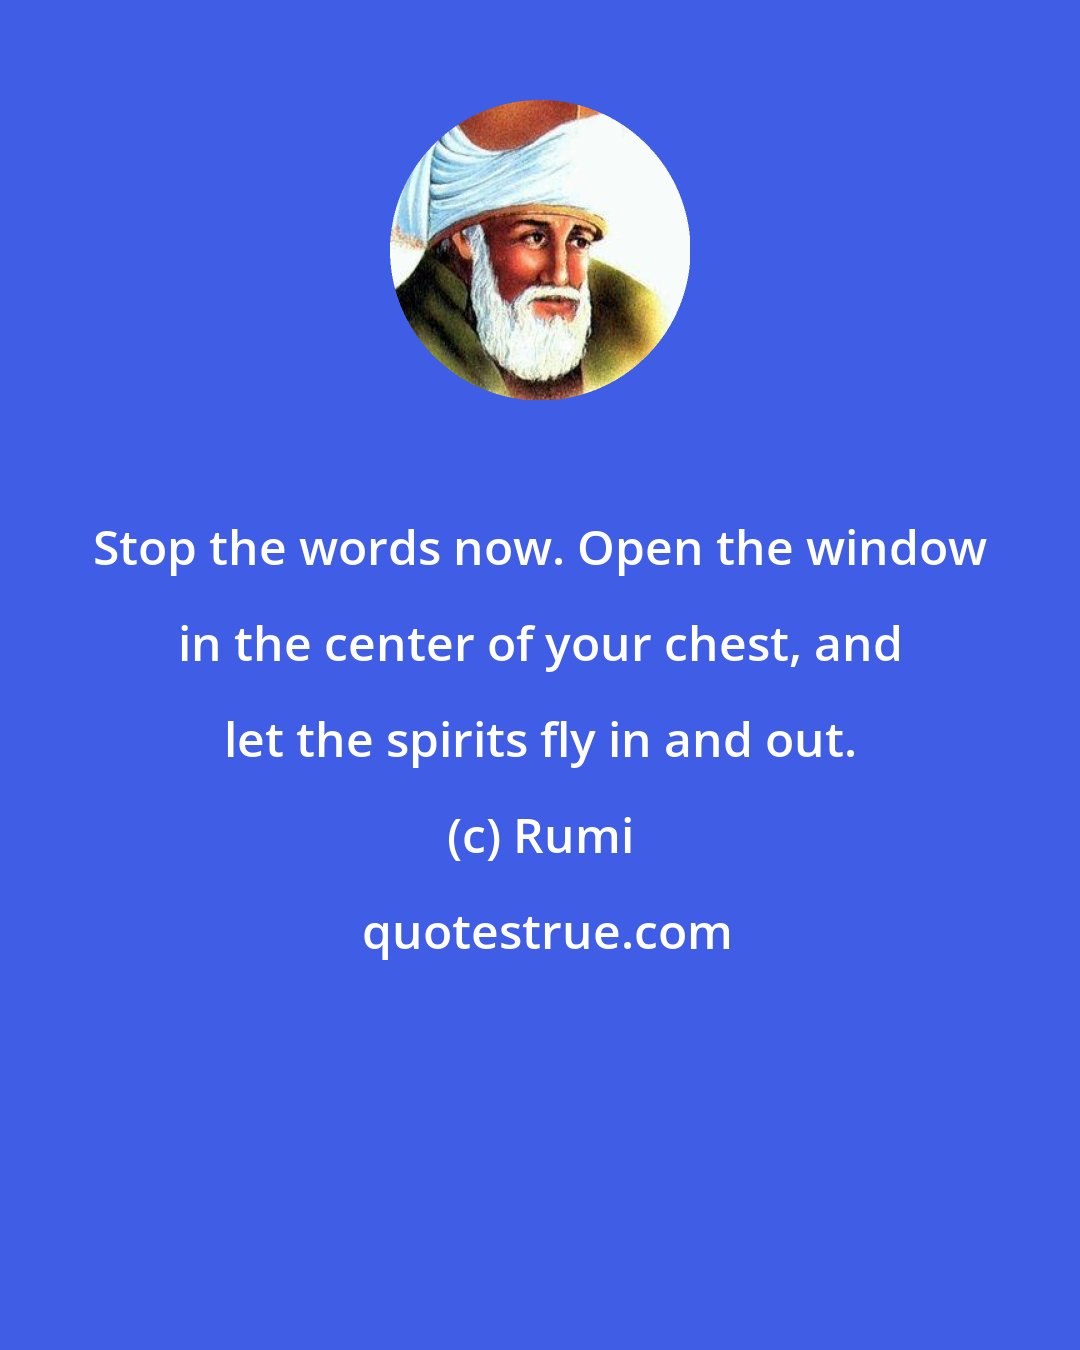 Rumi: Stop the words now. Open the window in the center of your chest, and let the spirits fly in and out.